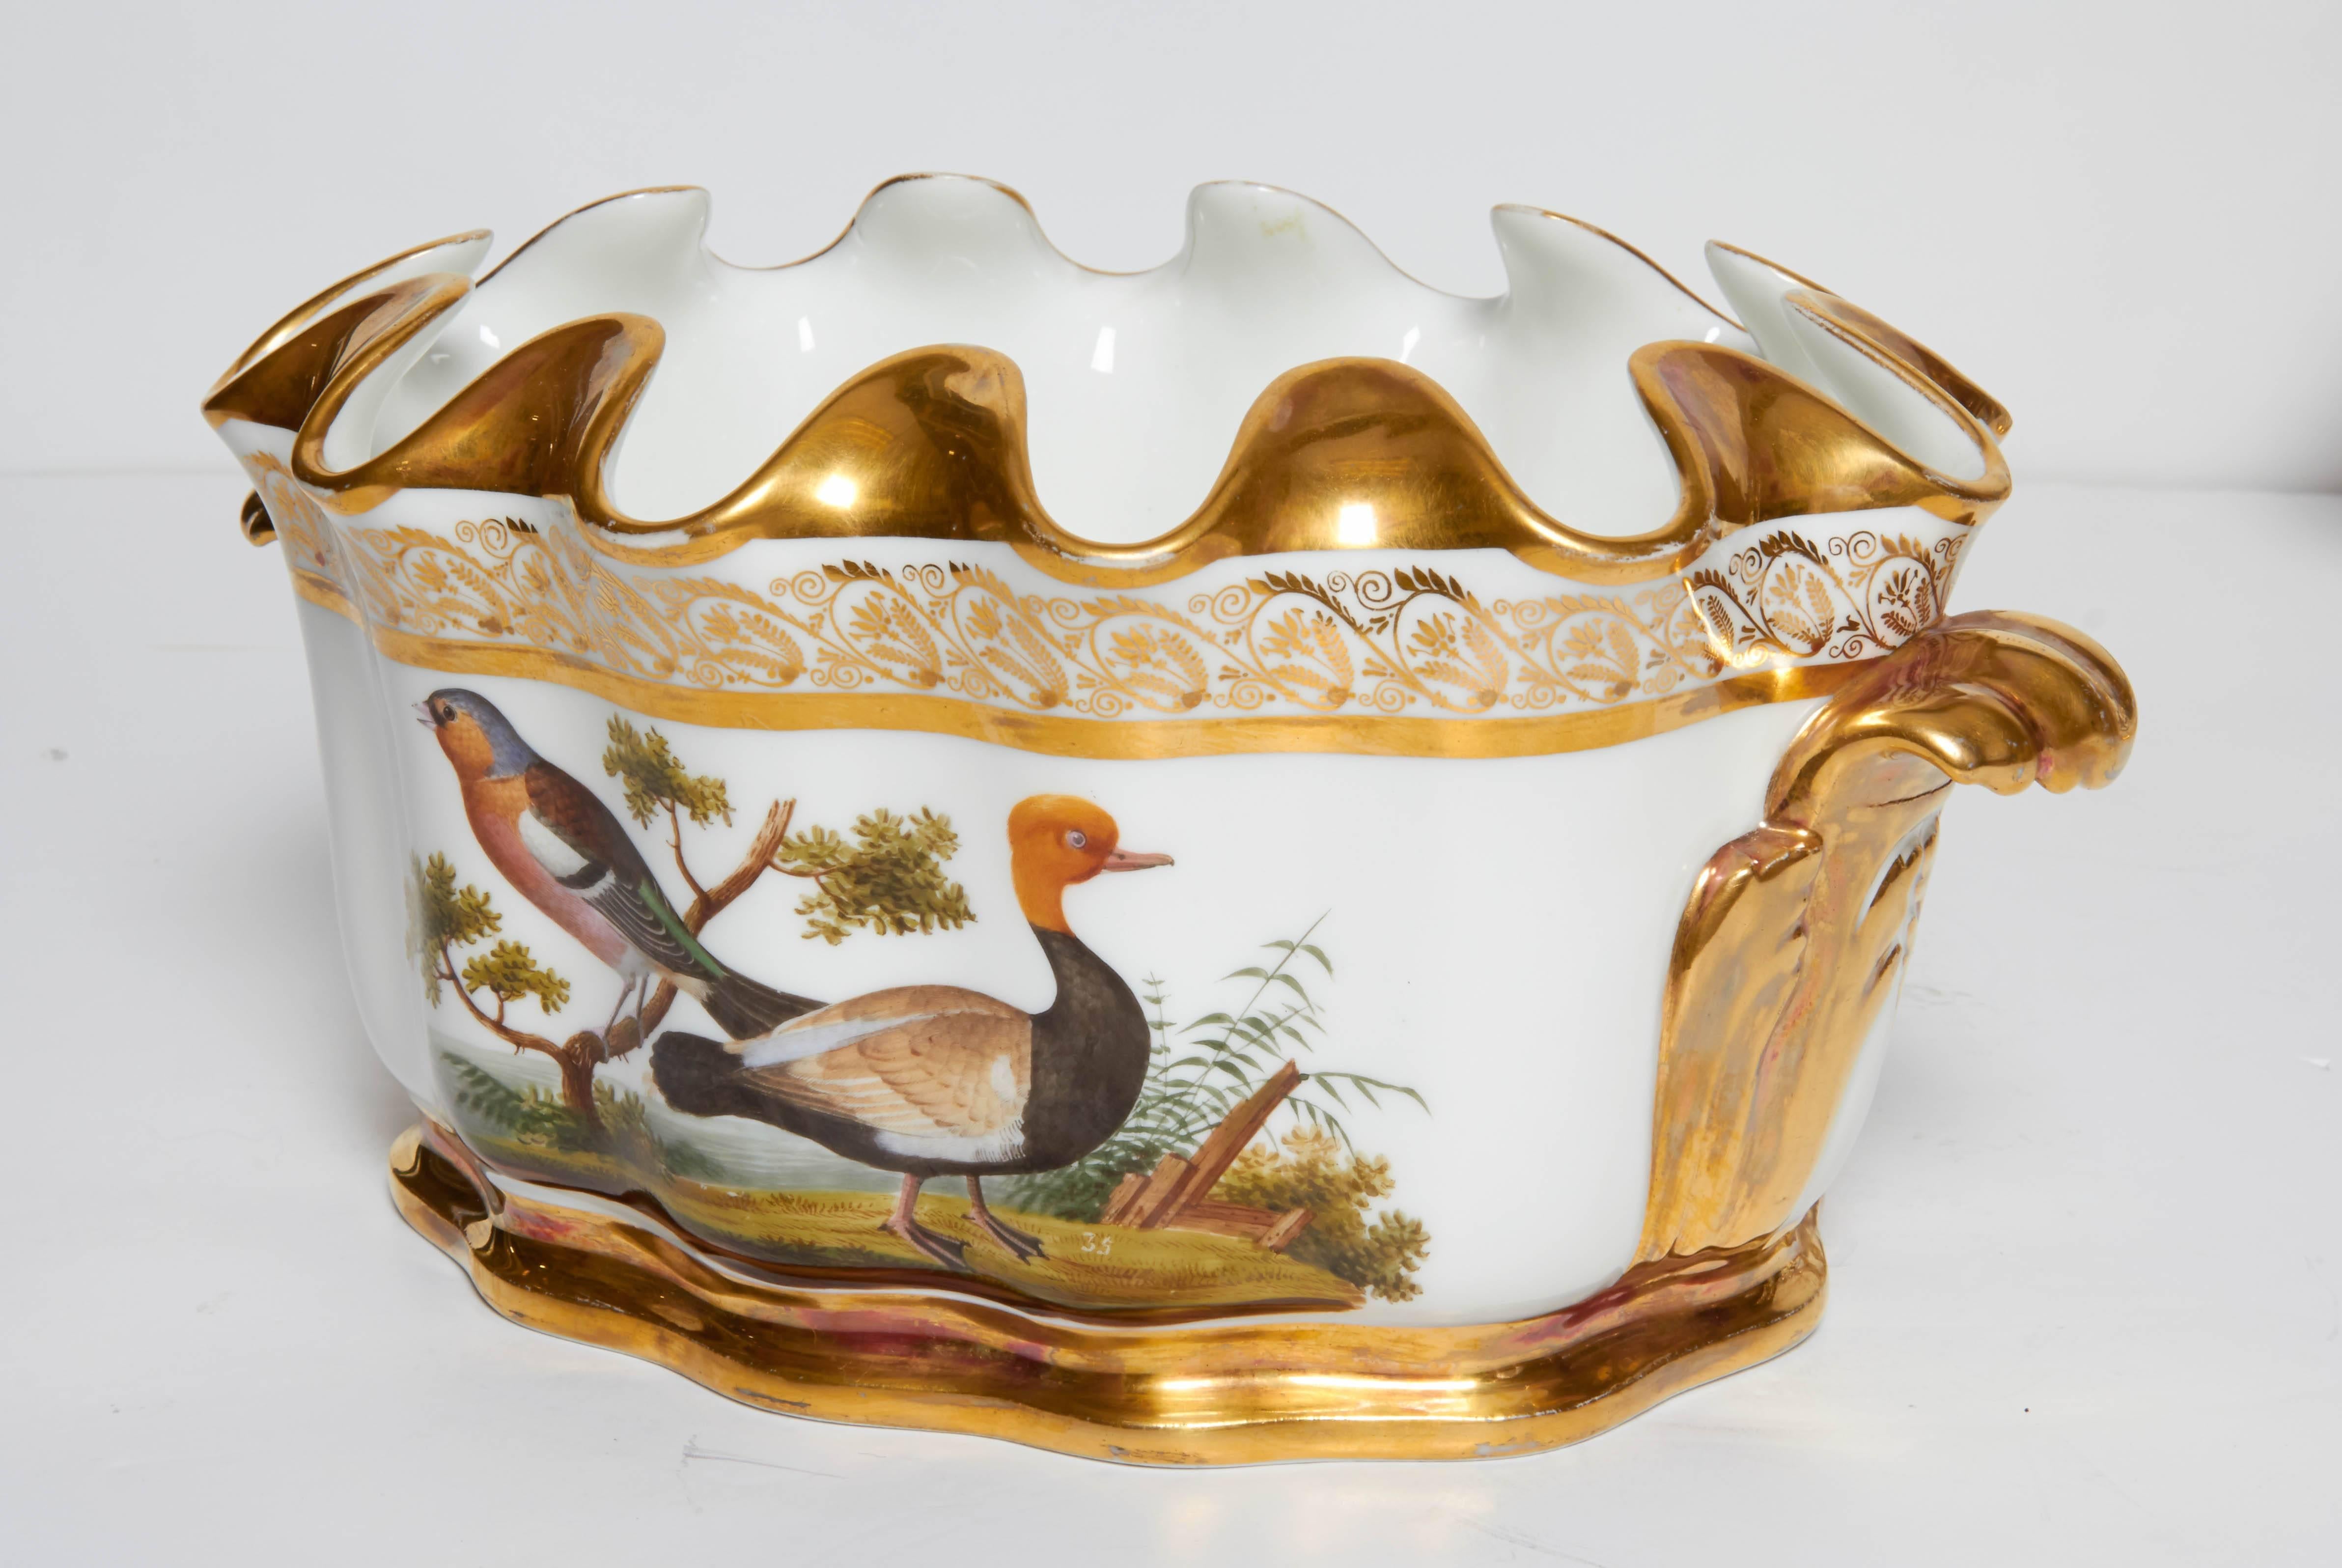 Pair of Naples-Decorated Porcelain Ornithological Glass Cooler/Rinser/Monteith 1